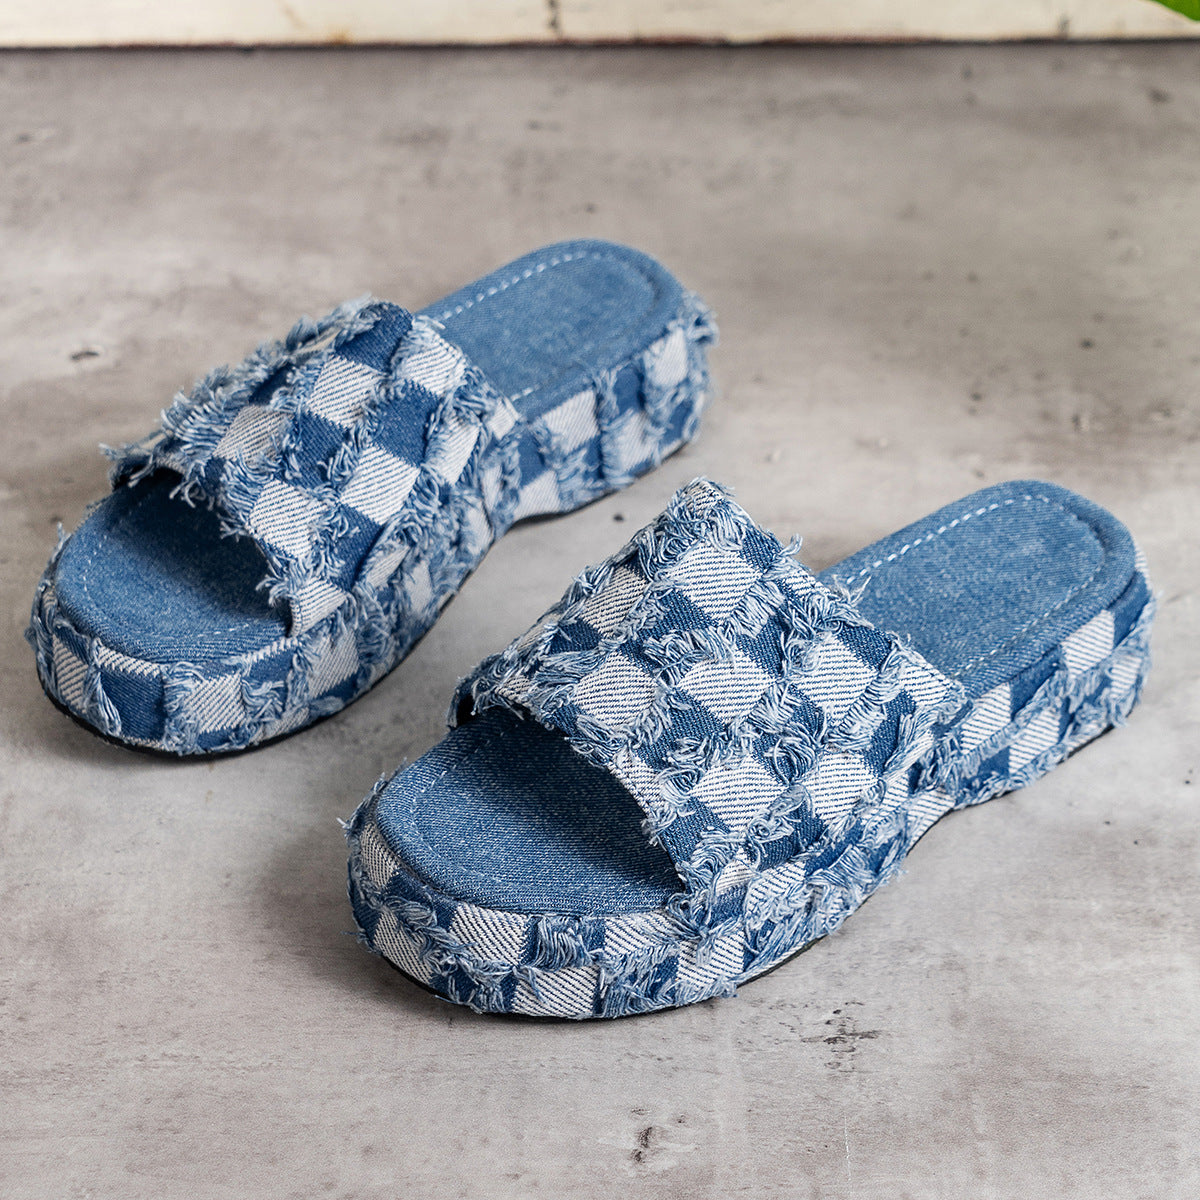 Upgrade your style with our Denim Plaid Faux Leather Platform Sandals. Crafted with a unique combination of denim plaid and faux leather, these sandals offer a trendy and chic look